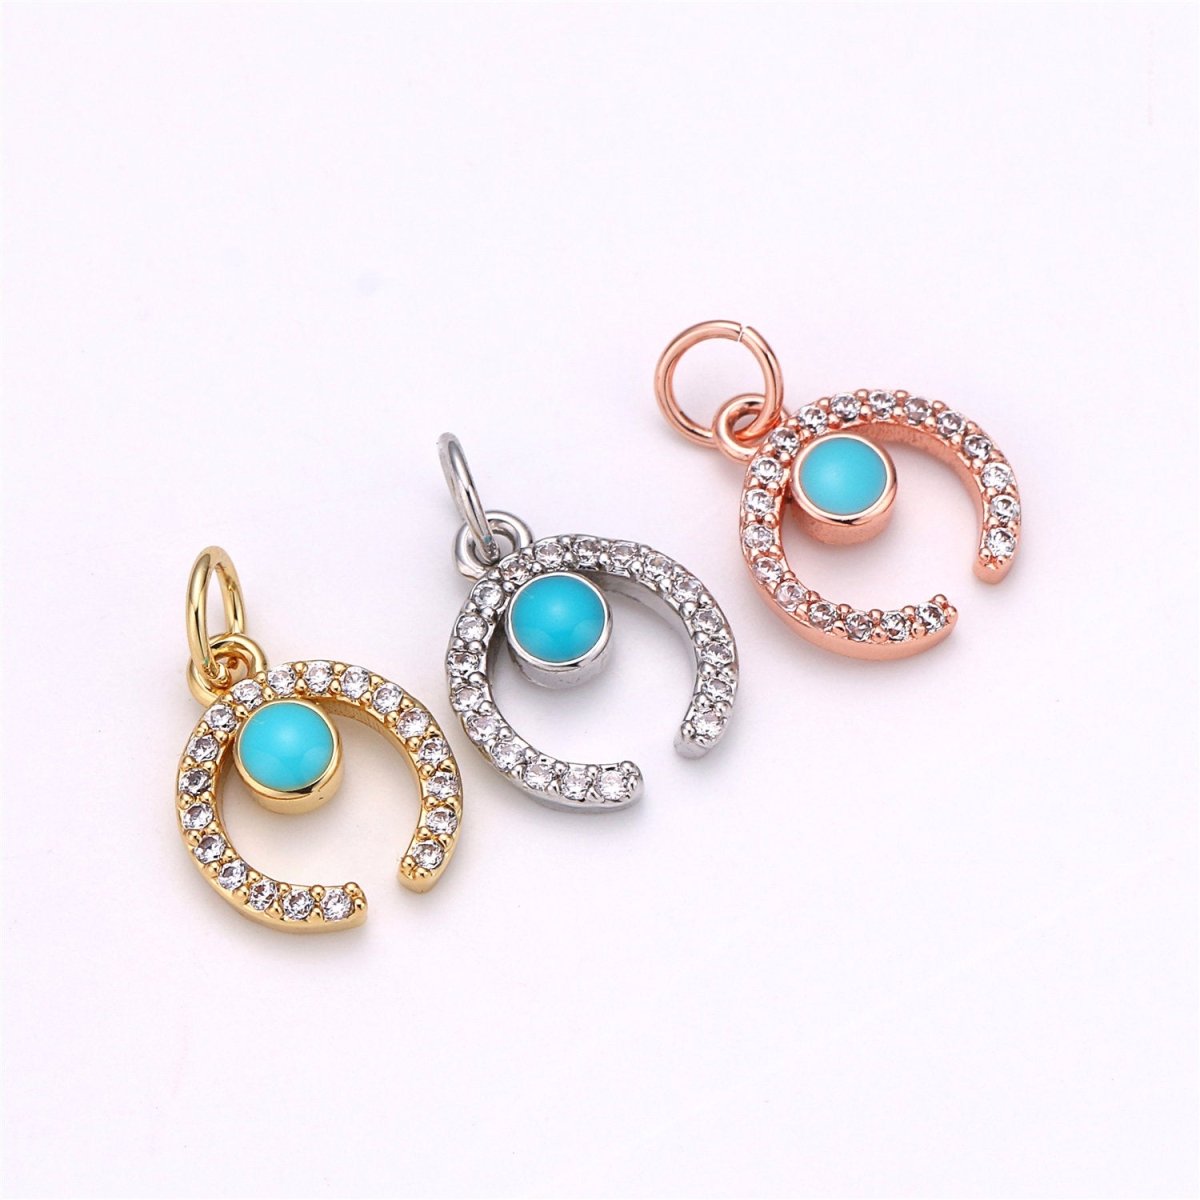 18k Gold Filled Dainty Crescent Moon HorseShoe Delicate Small Tiny Lucky Charm Pendant CZ Micro Pave for Earring Necklace Bracelet making C398 - DLUXCA